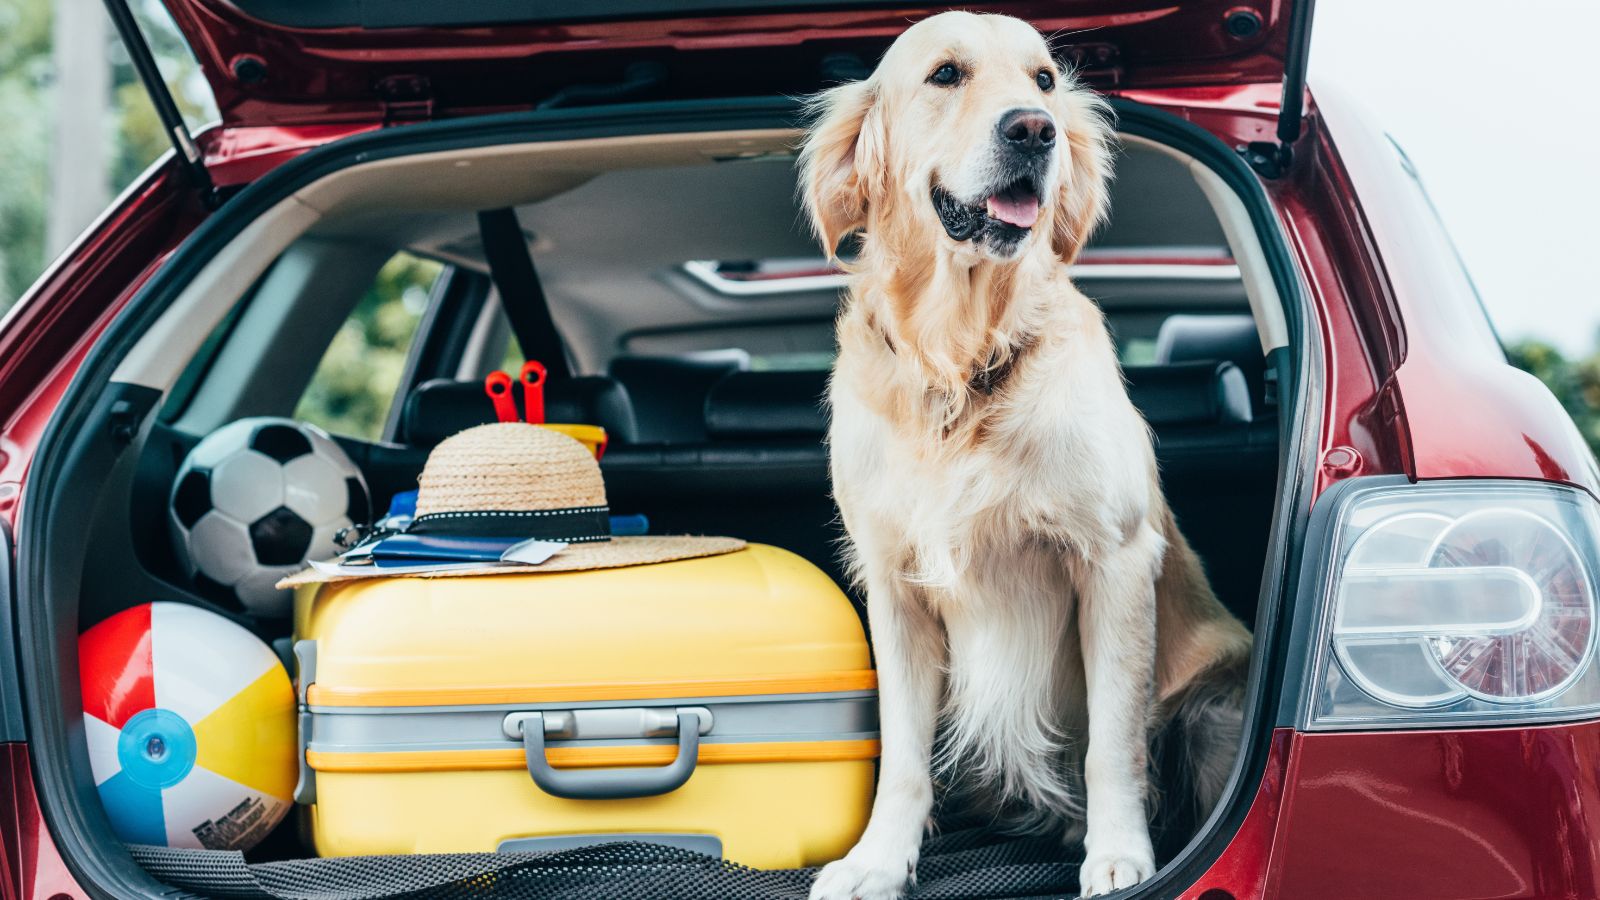 <p>Nearly seven in 10 U.S. households owned a pet as of 2024, according to Forbes. </p> <p>If your dog travels with you on family road trips or when you’re running errands, you’ll want to ensure it’s safe from point A to point B. Just because your dog likes to poke its head out the window, play on your lap, or wander around a moving car, doesn’t mean it’s right.</p> <p>So that you and your four-legged bundle of joy get to and from in one piece, here are 16 car safety tips when traveling with man’s (or woman’s) best friend.</p>